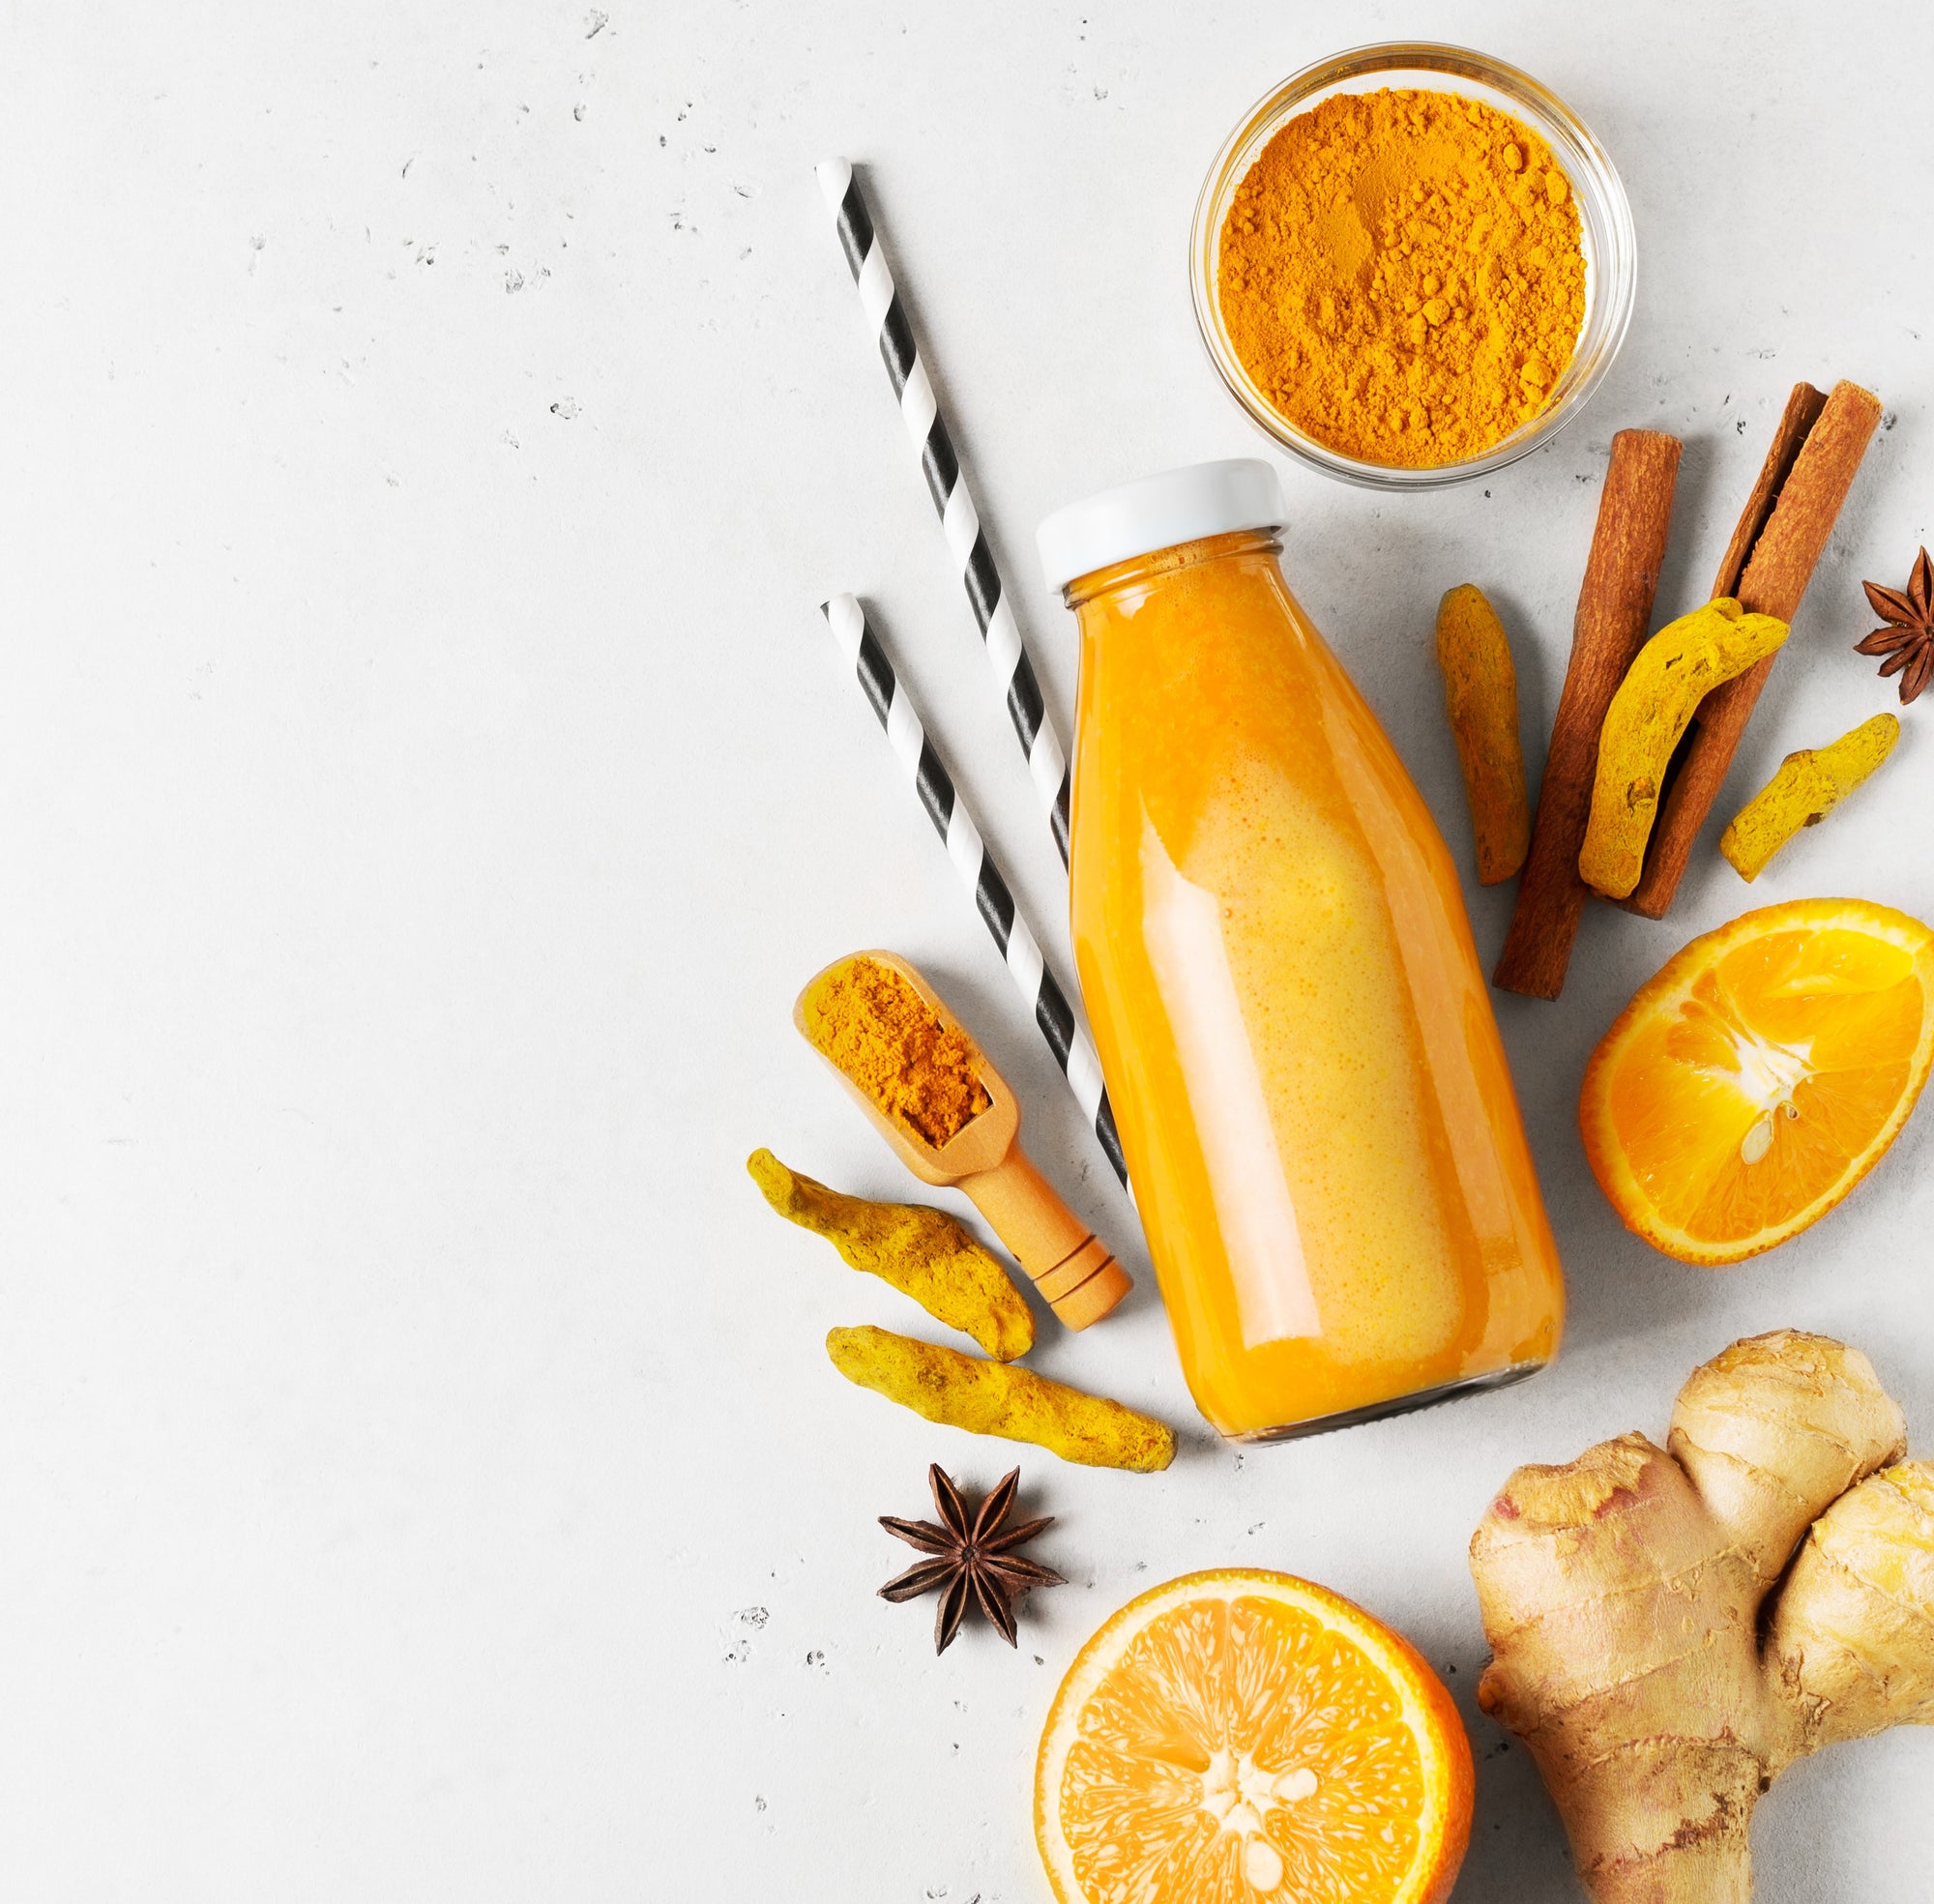 1 jar of Tami's Anti-Inflammatory Smoothie beside 2 straws, 1 small bowl of turmeric powder, cinnamon sticks, turmeric, 2 slices of oranges, ginger, and star anis on a white background.